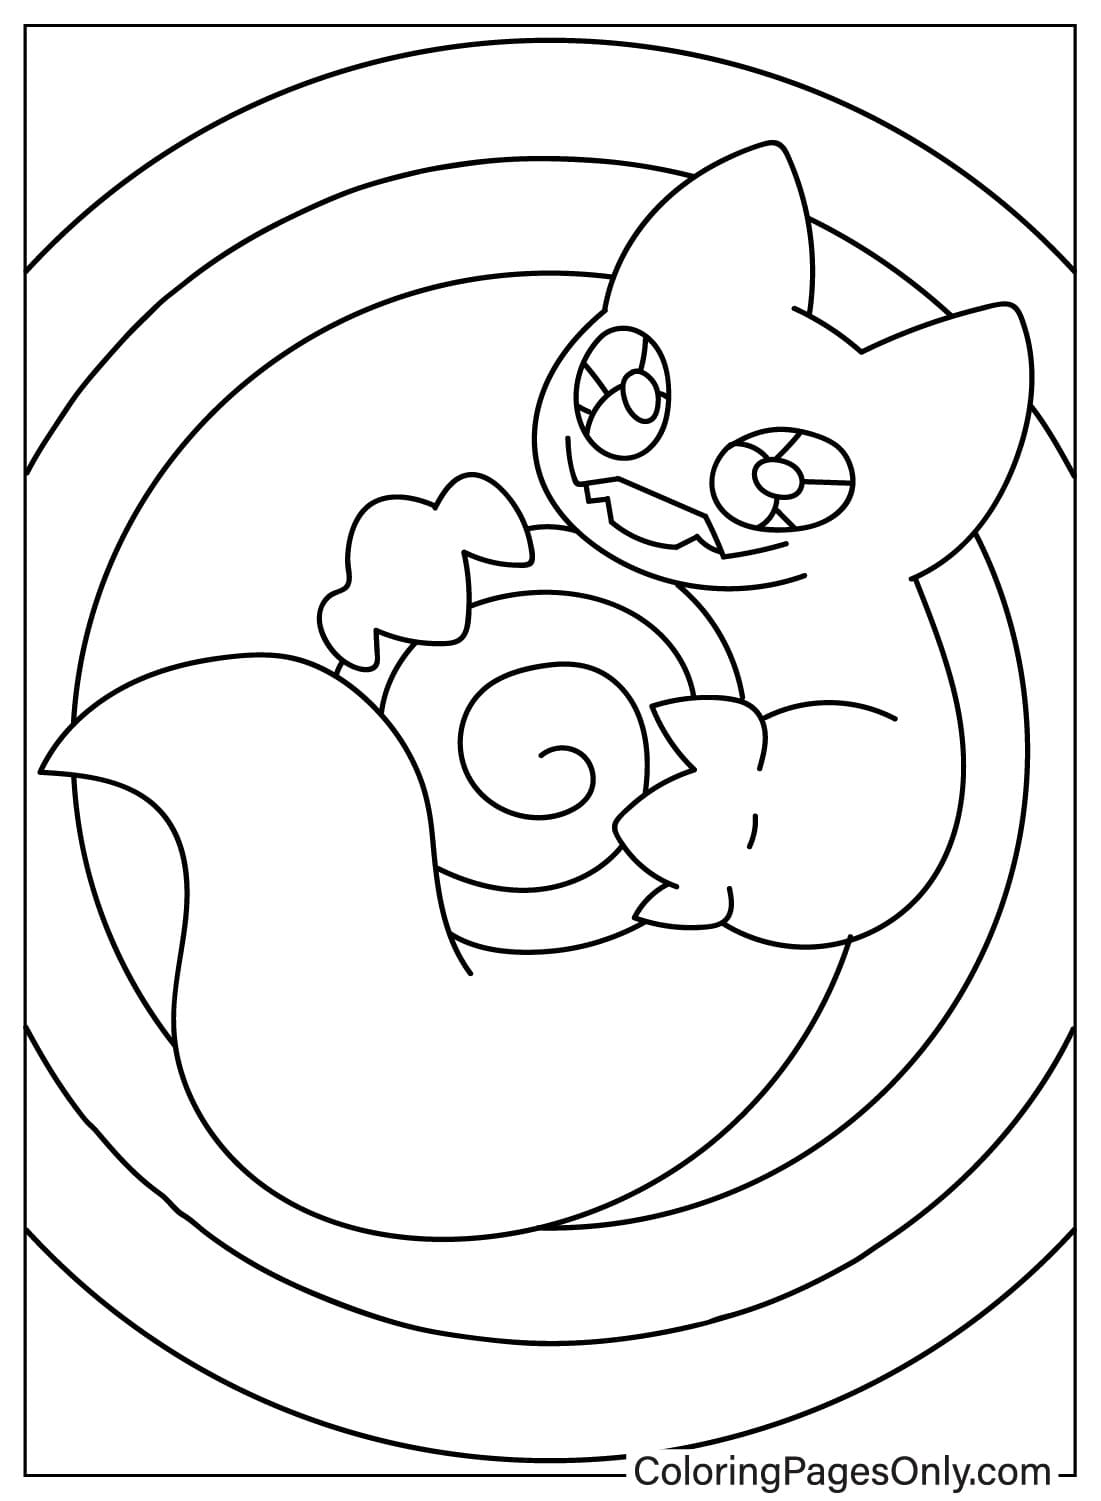 Ghazt Printable Coloring Page from Ghazt